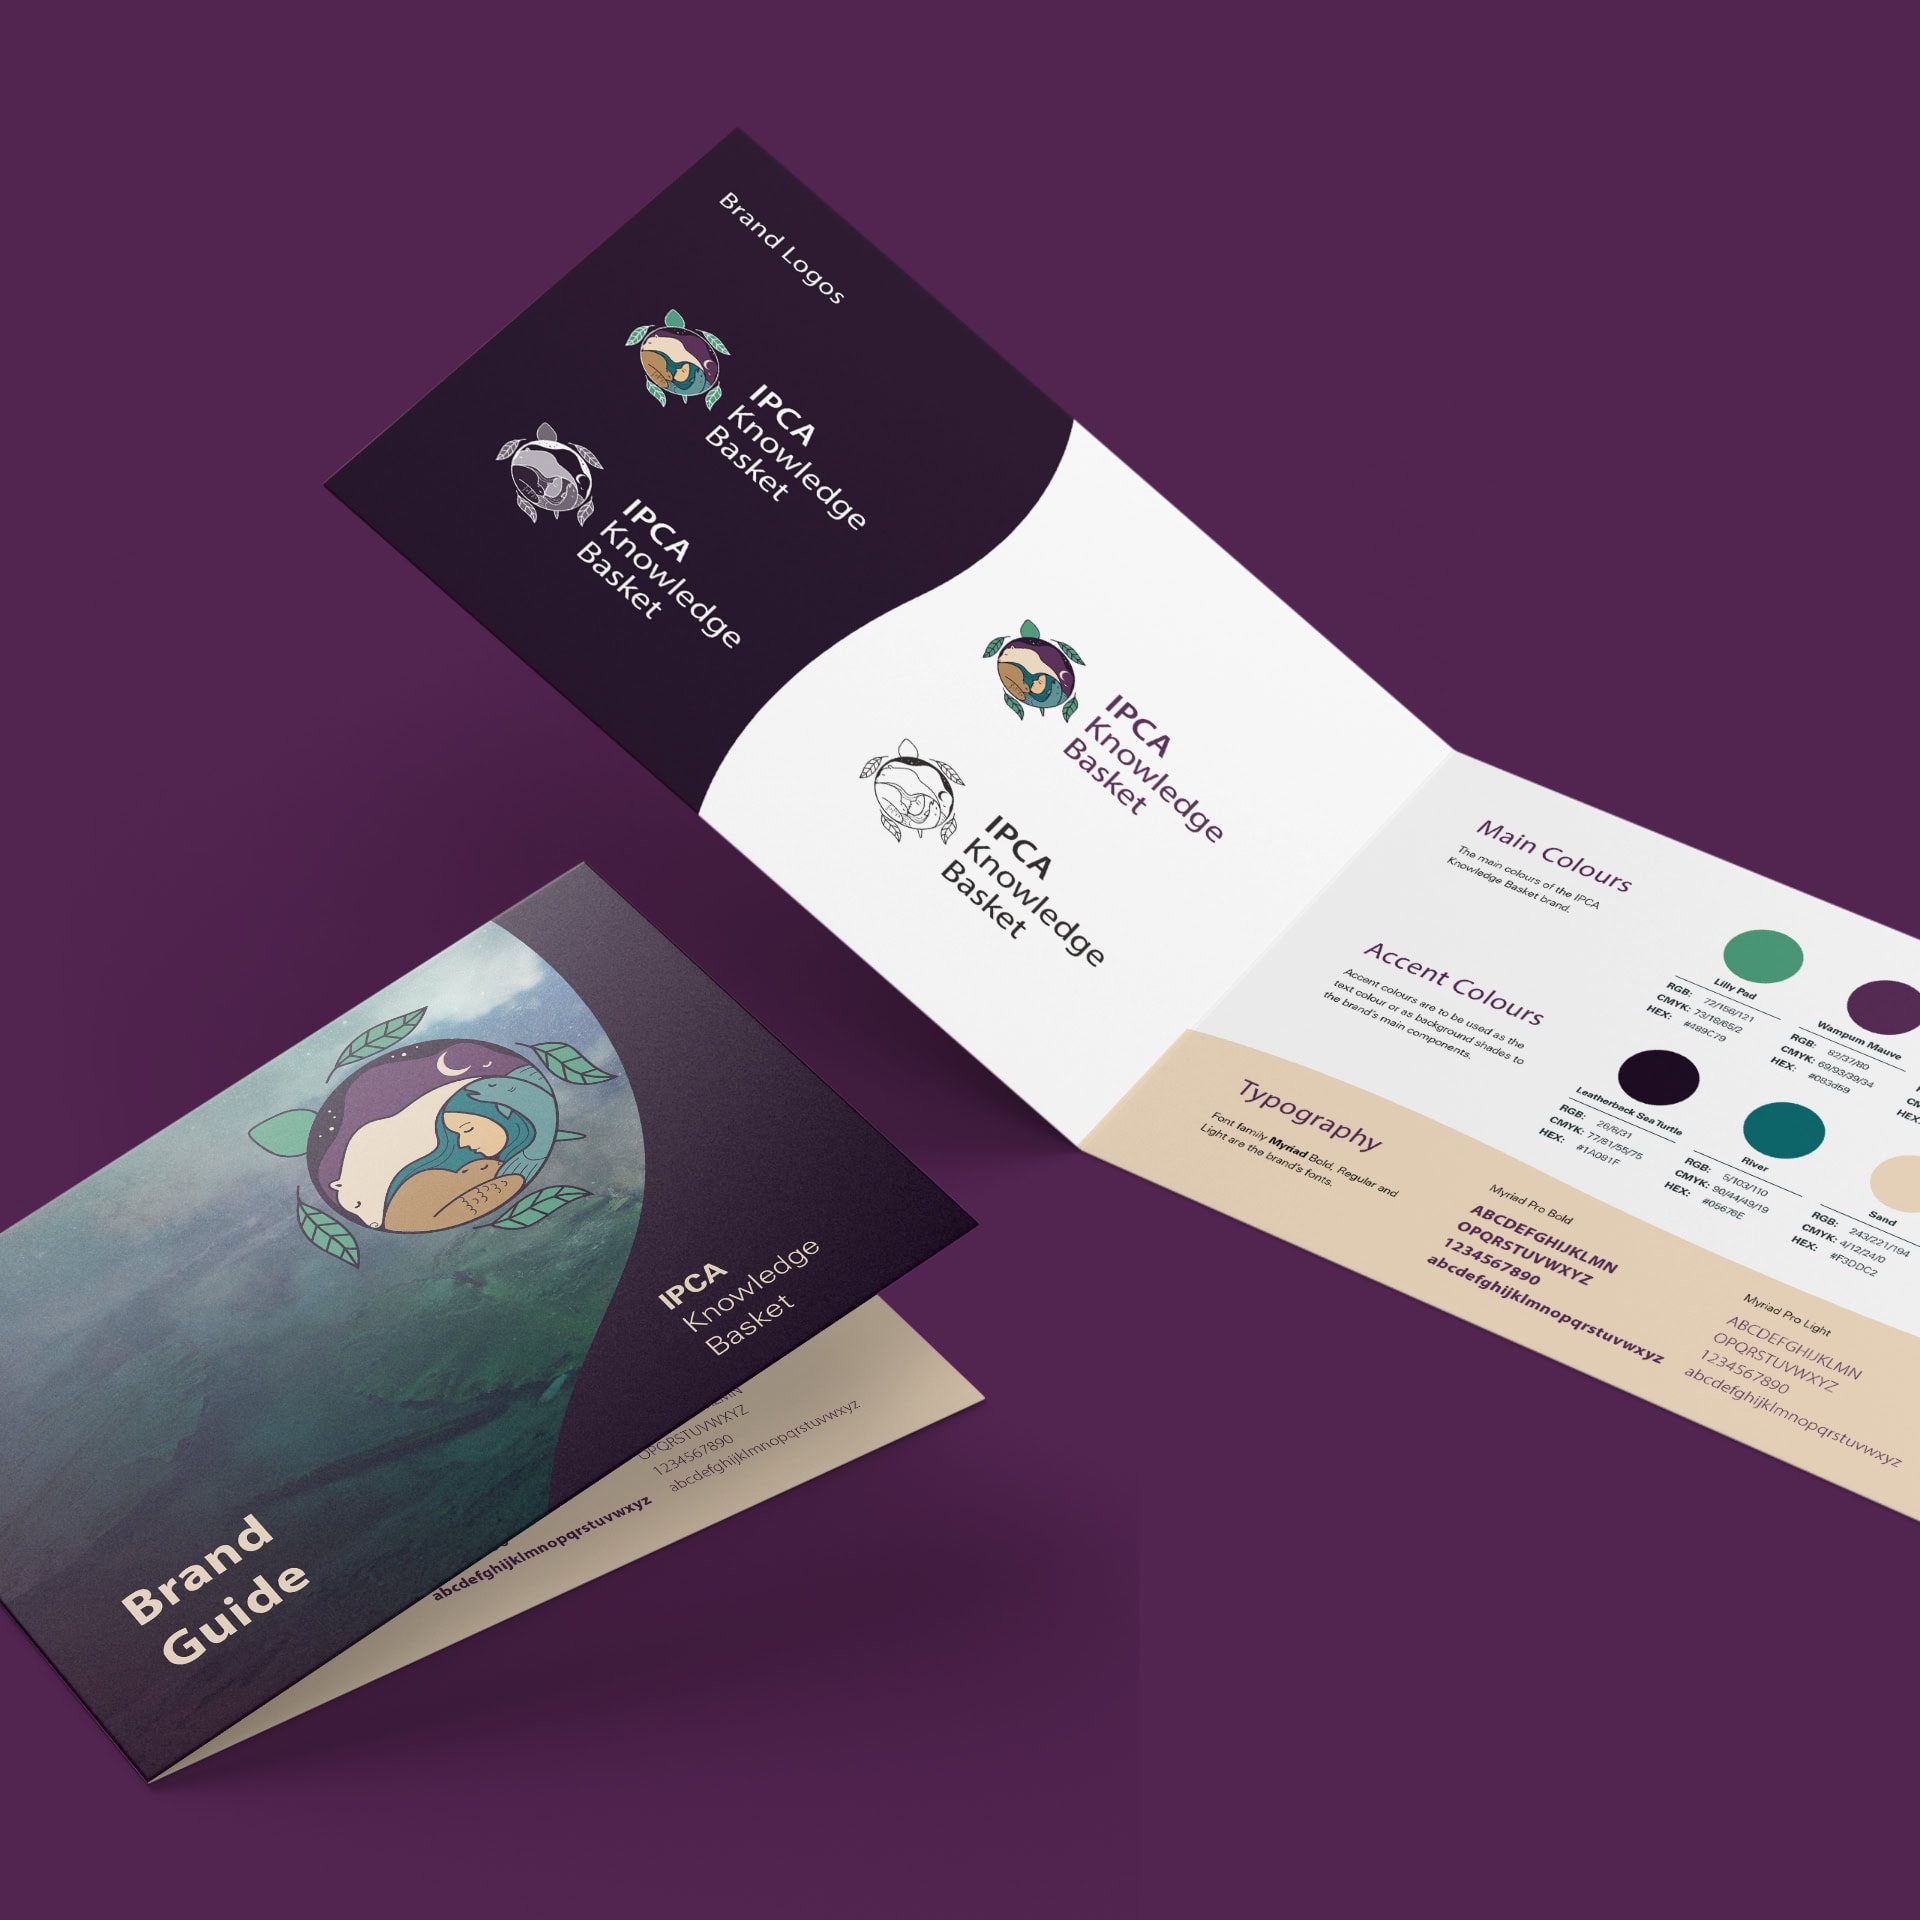 IPCA Knowledge Basket brand guide open booklet